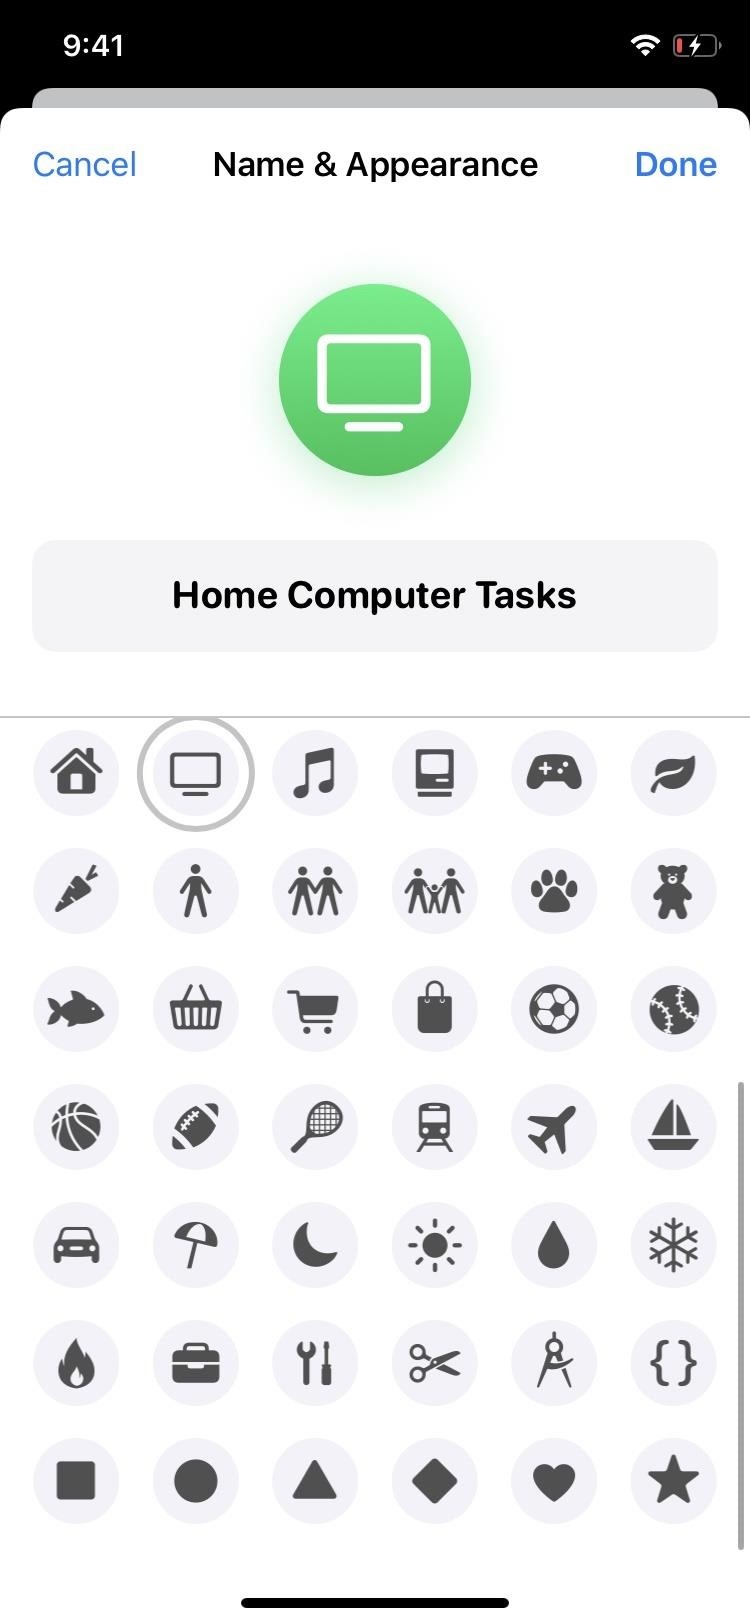 15 Awesome 'Reminders' Features in iOS 13 That'll Make You Actually Want to Use the App